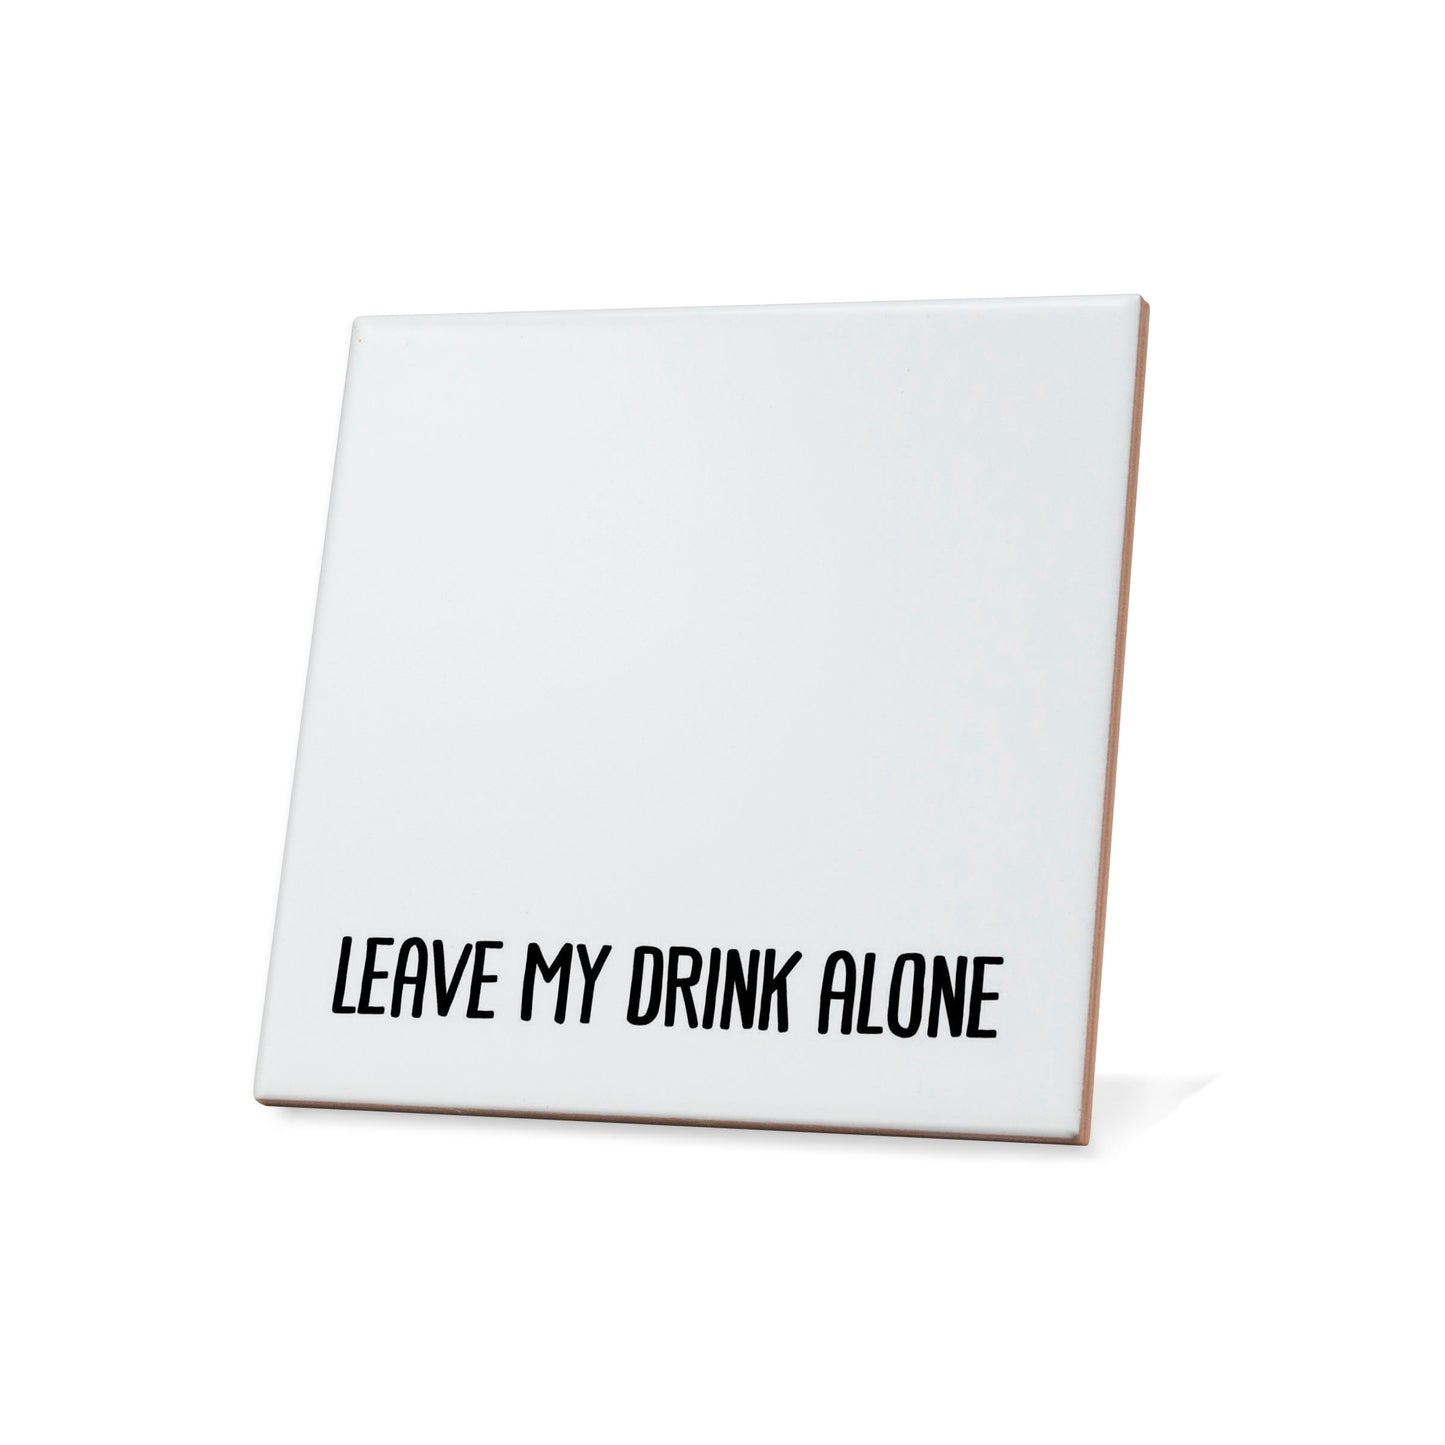 Leave my drink alone Coaster